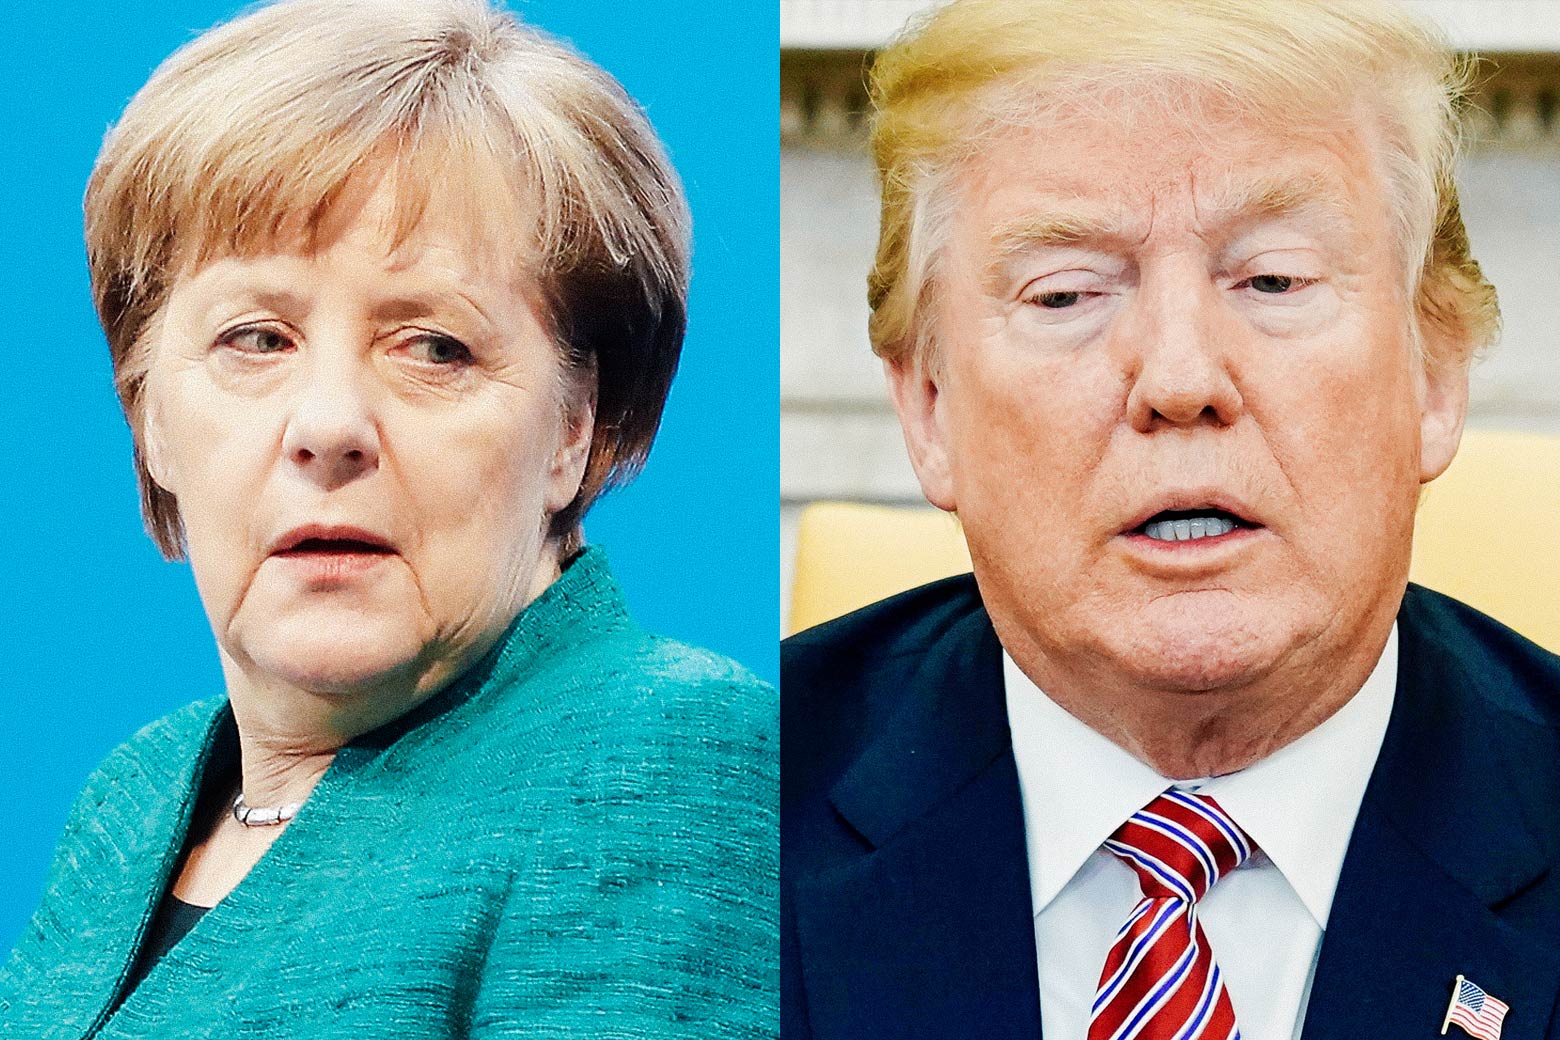 A side-by-side collage of Angela Merkel and Donald Trump.